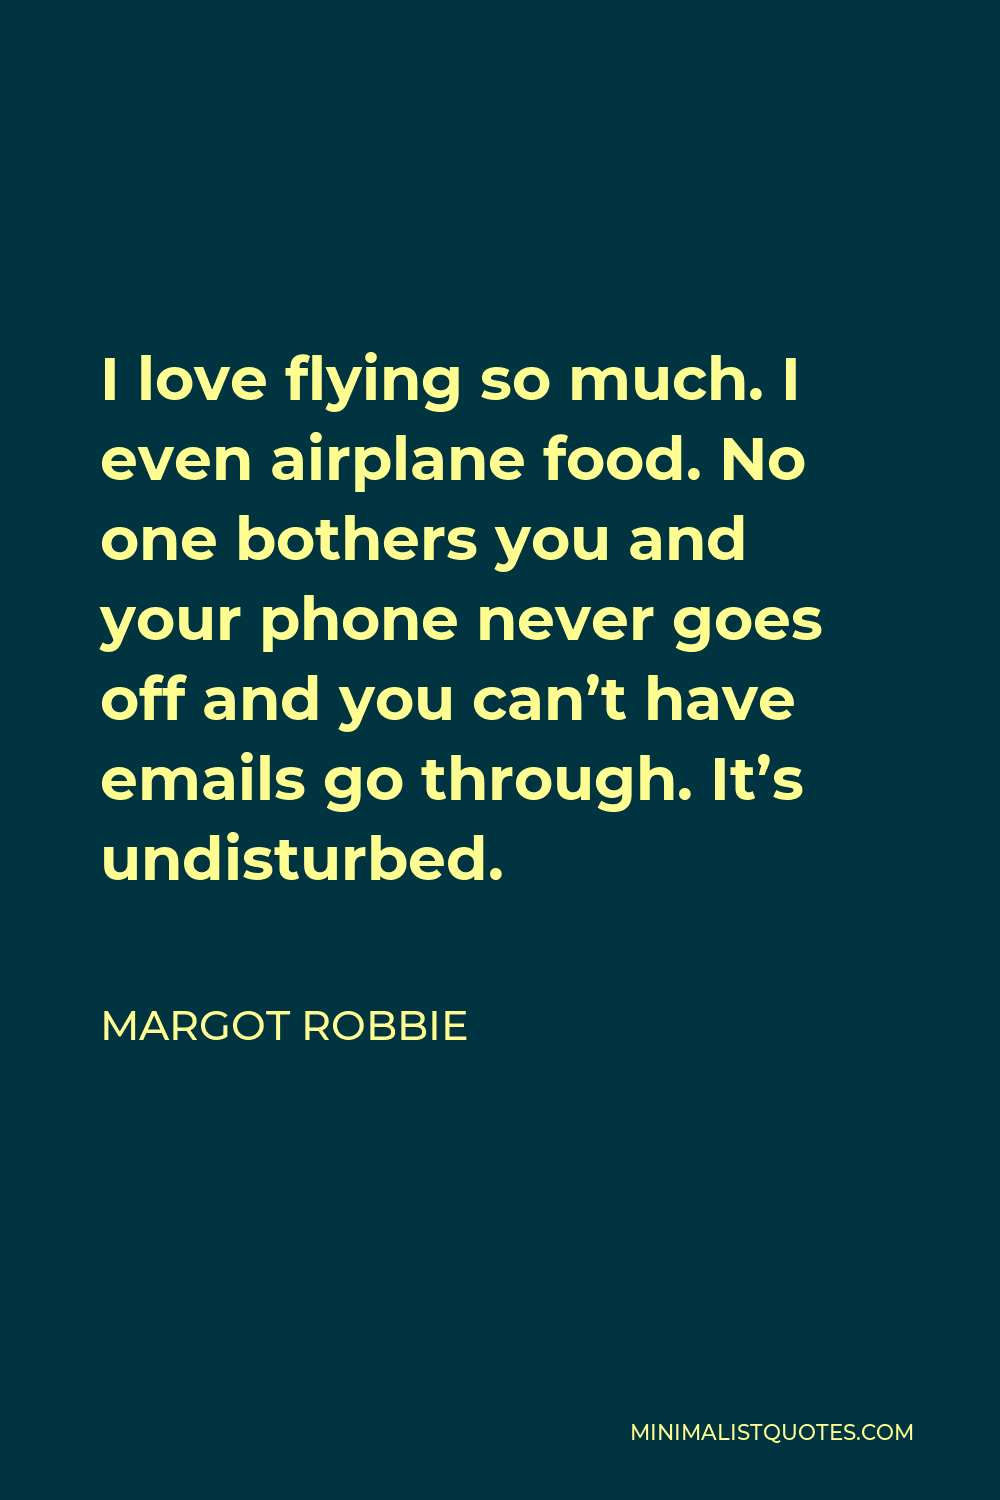 Margot Robbie Quote - I love flying so much. I even airplane food. No one bothers you and your phone never goes off and you can’t have emails go through. It’s undisturbed.